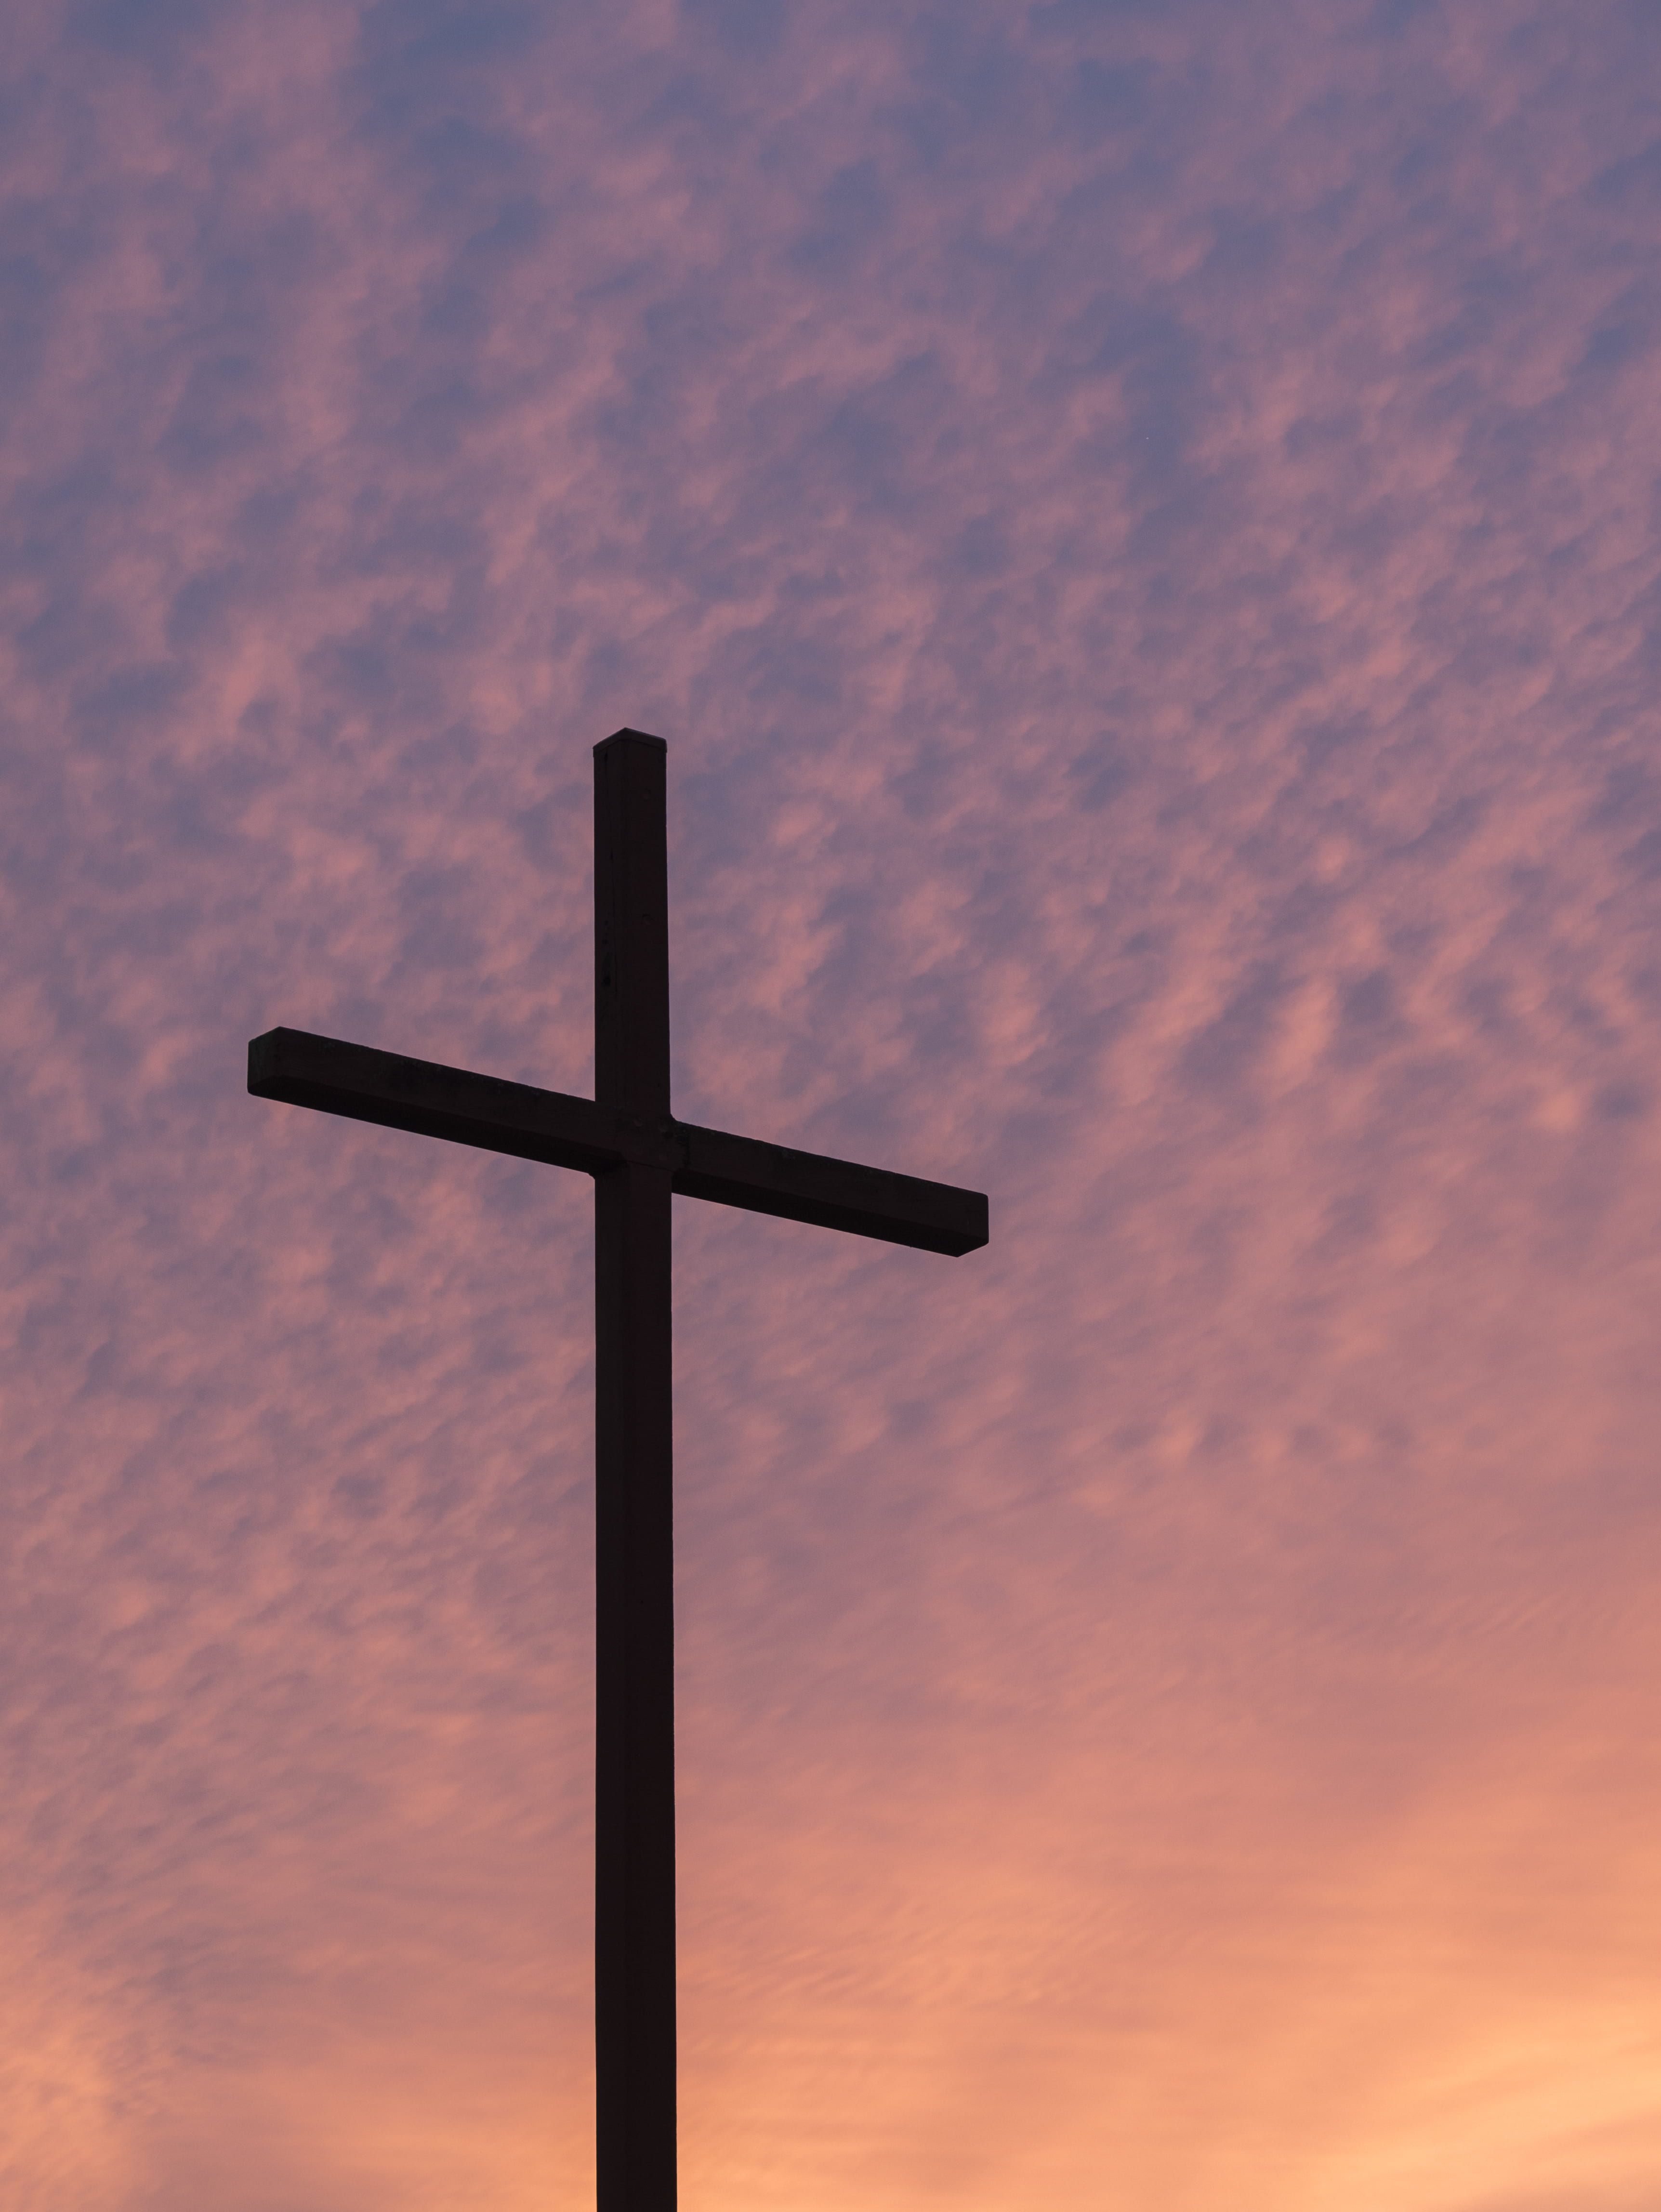 silhouette of large cross during daytime, silhouette of cross under against calm sky